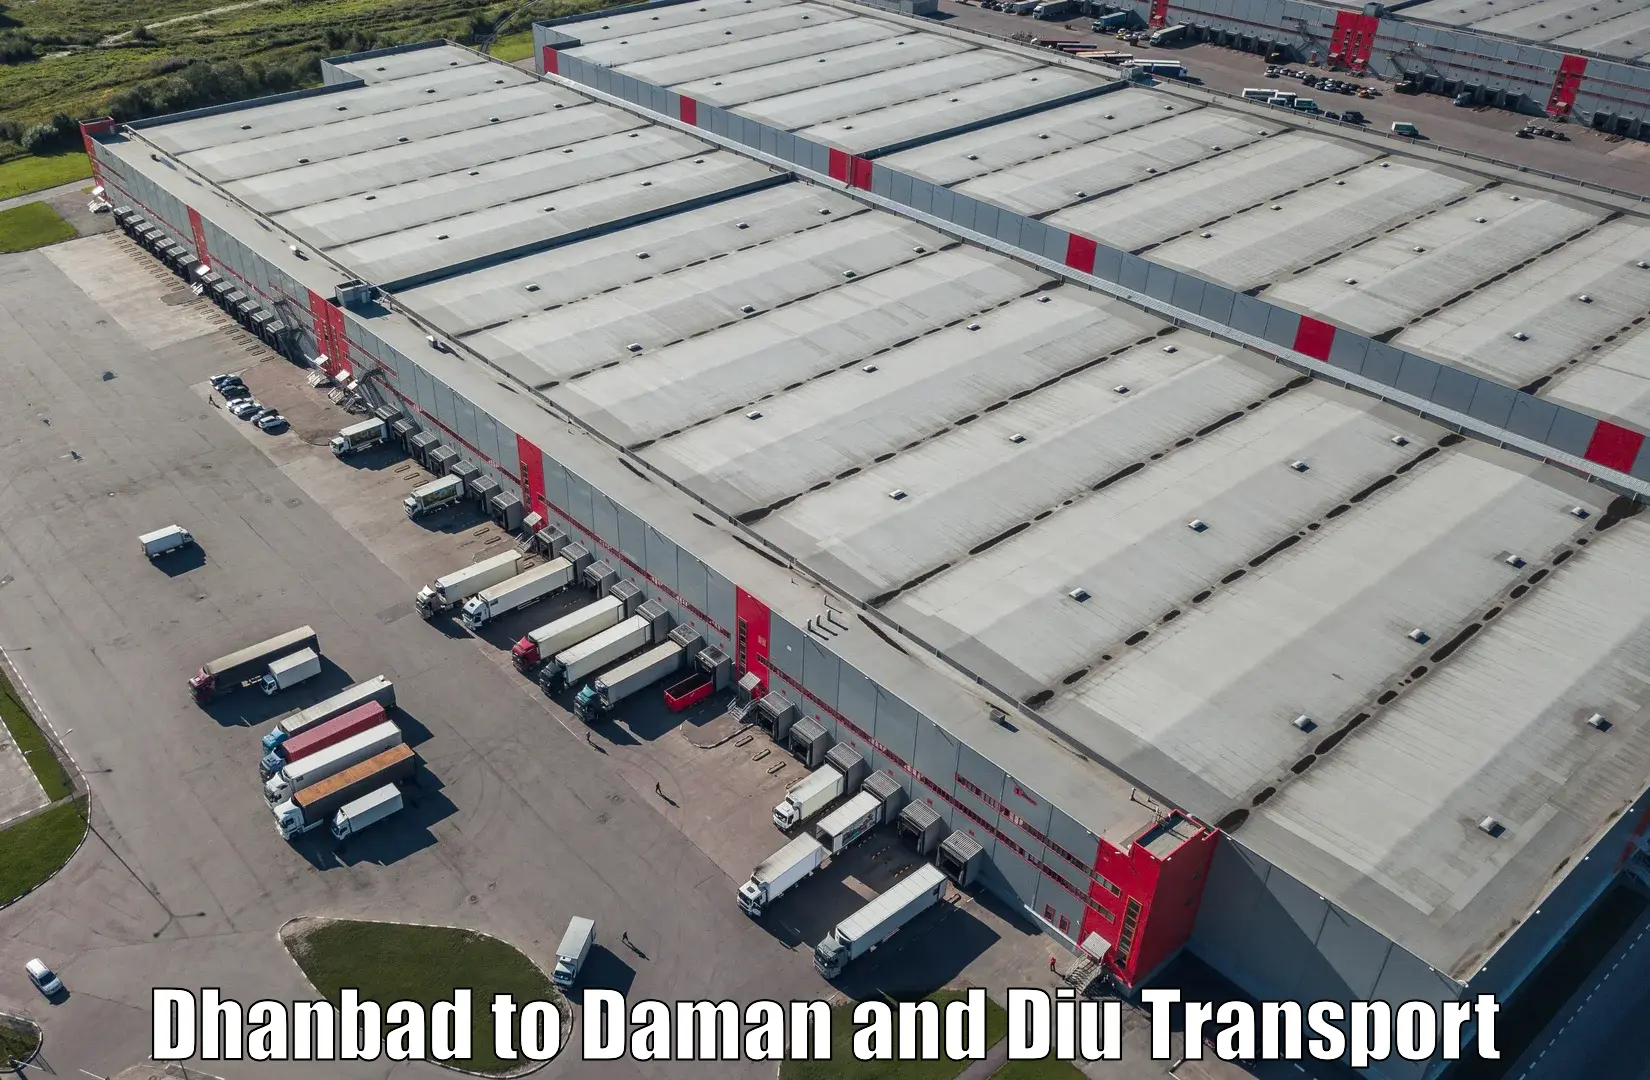 Truck transport companies in India in Dhanbad to Diu